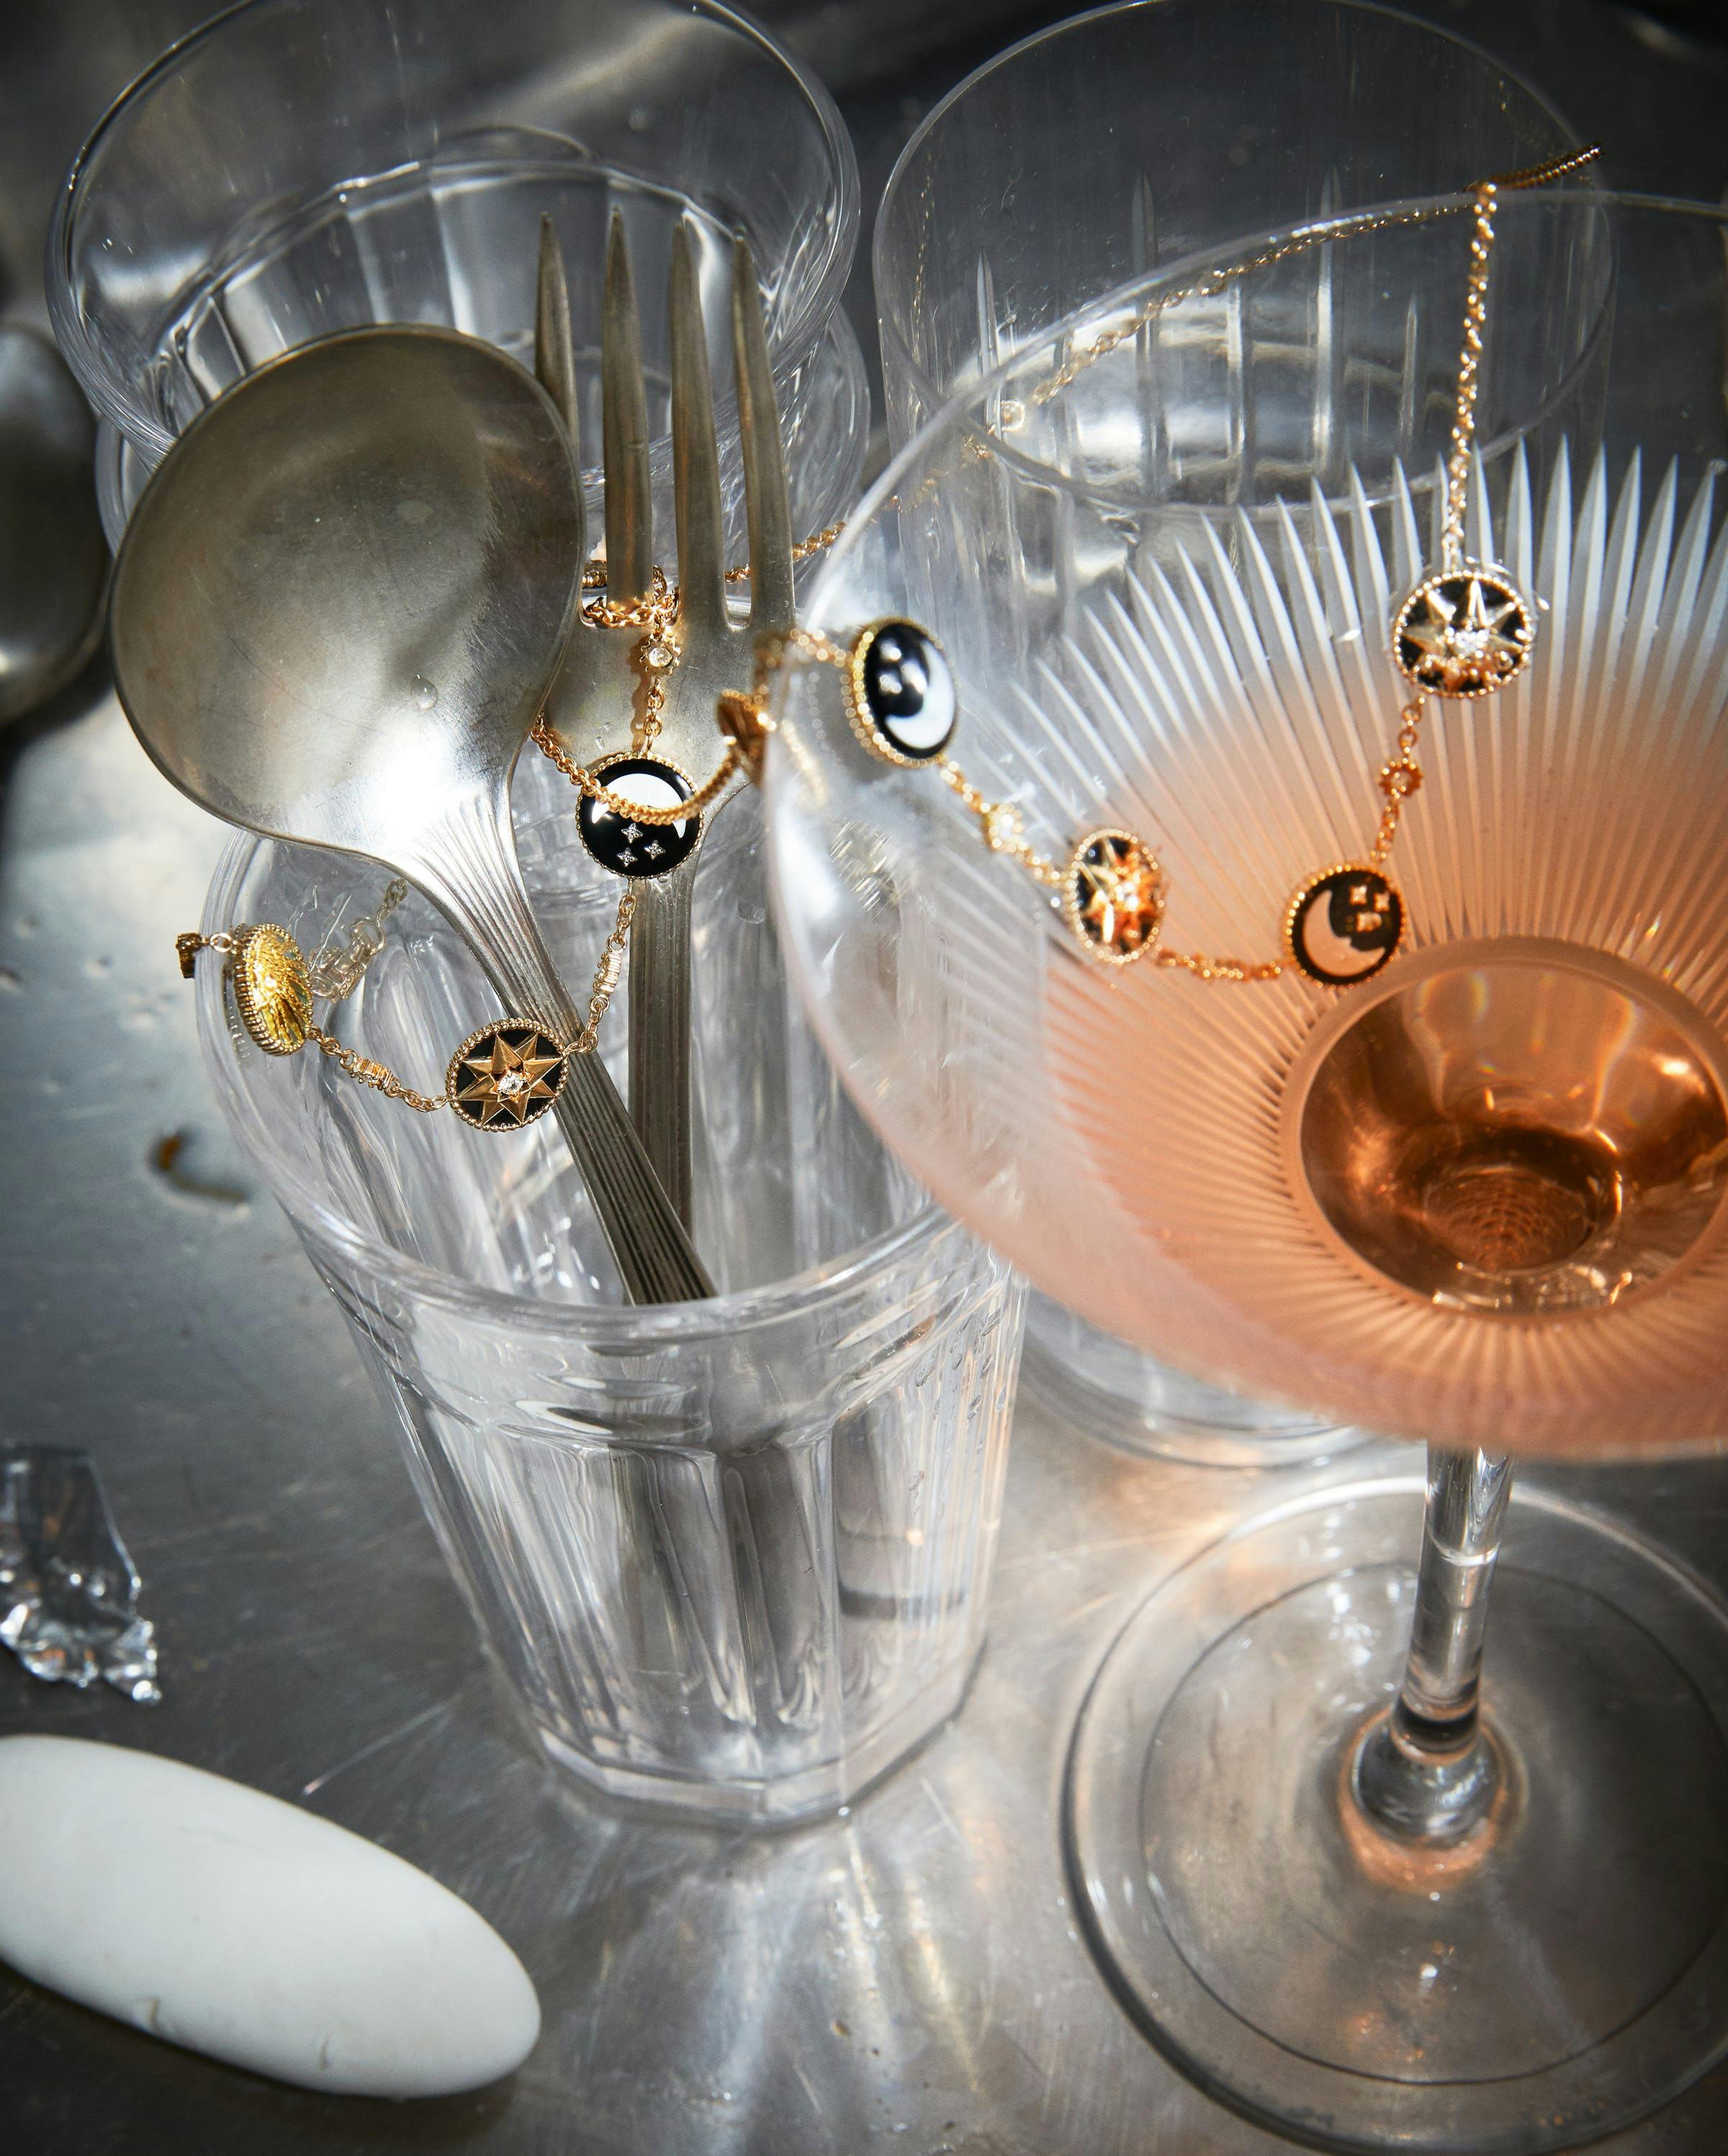 martini glass with pink drink, spoon and food in empty glass